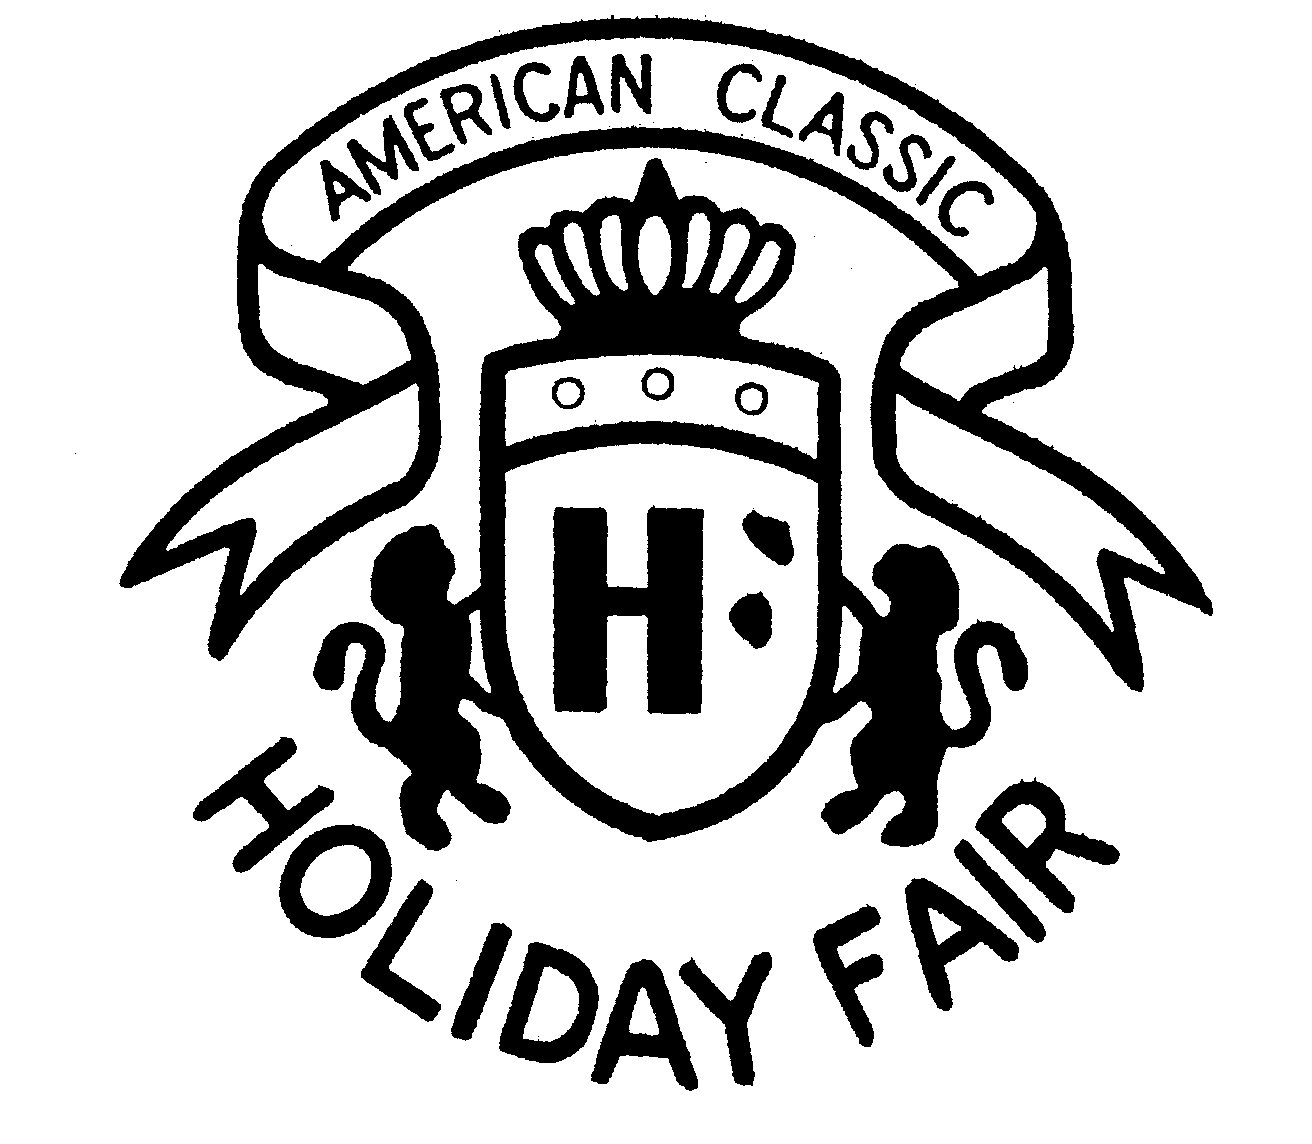  AMERICAN CLASSIC HOLIDAY FAIR AND DESIGN